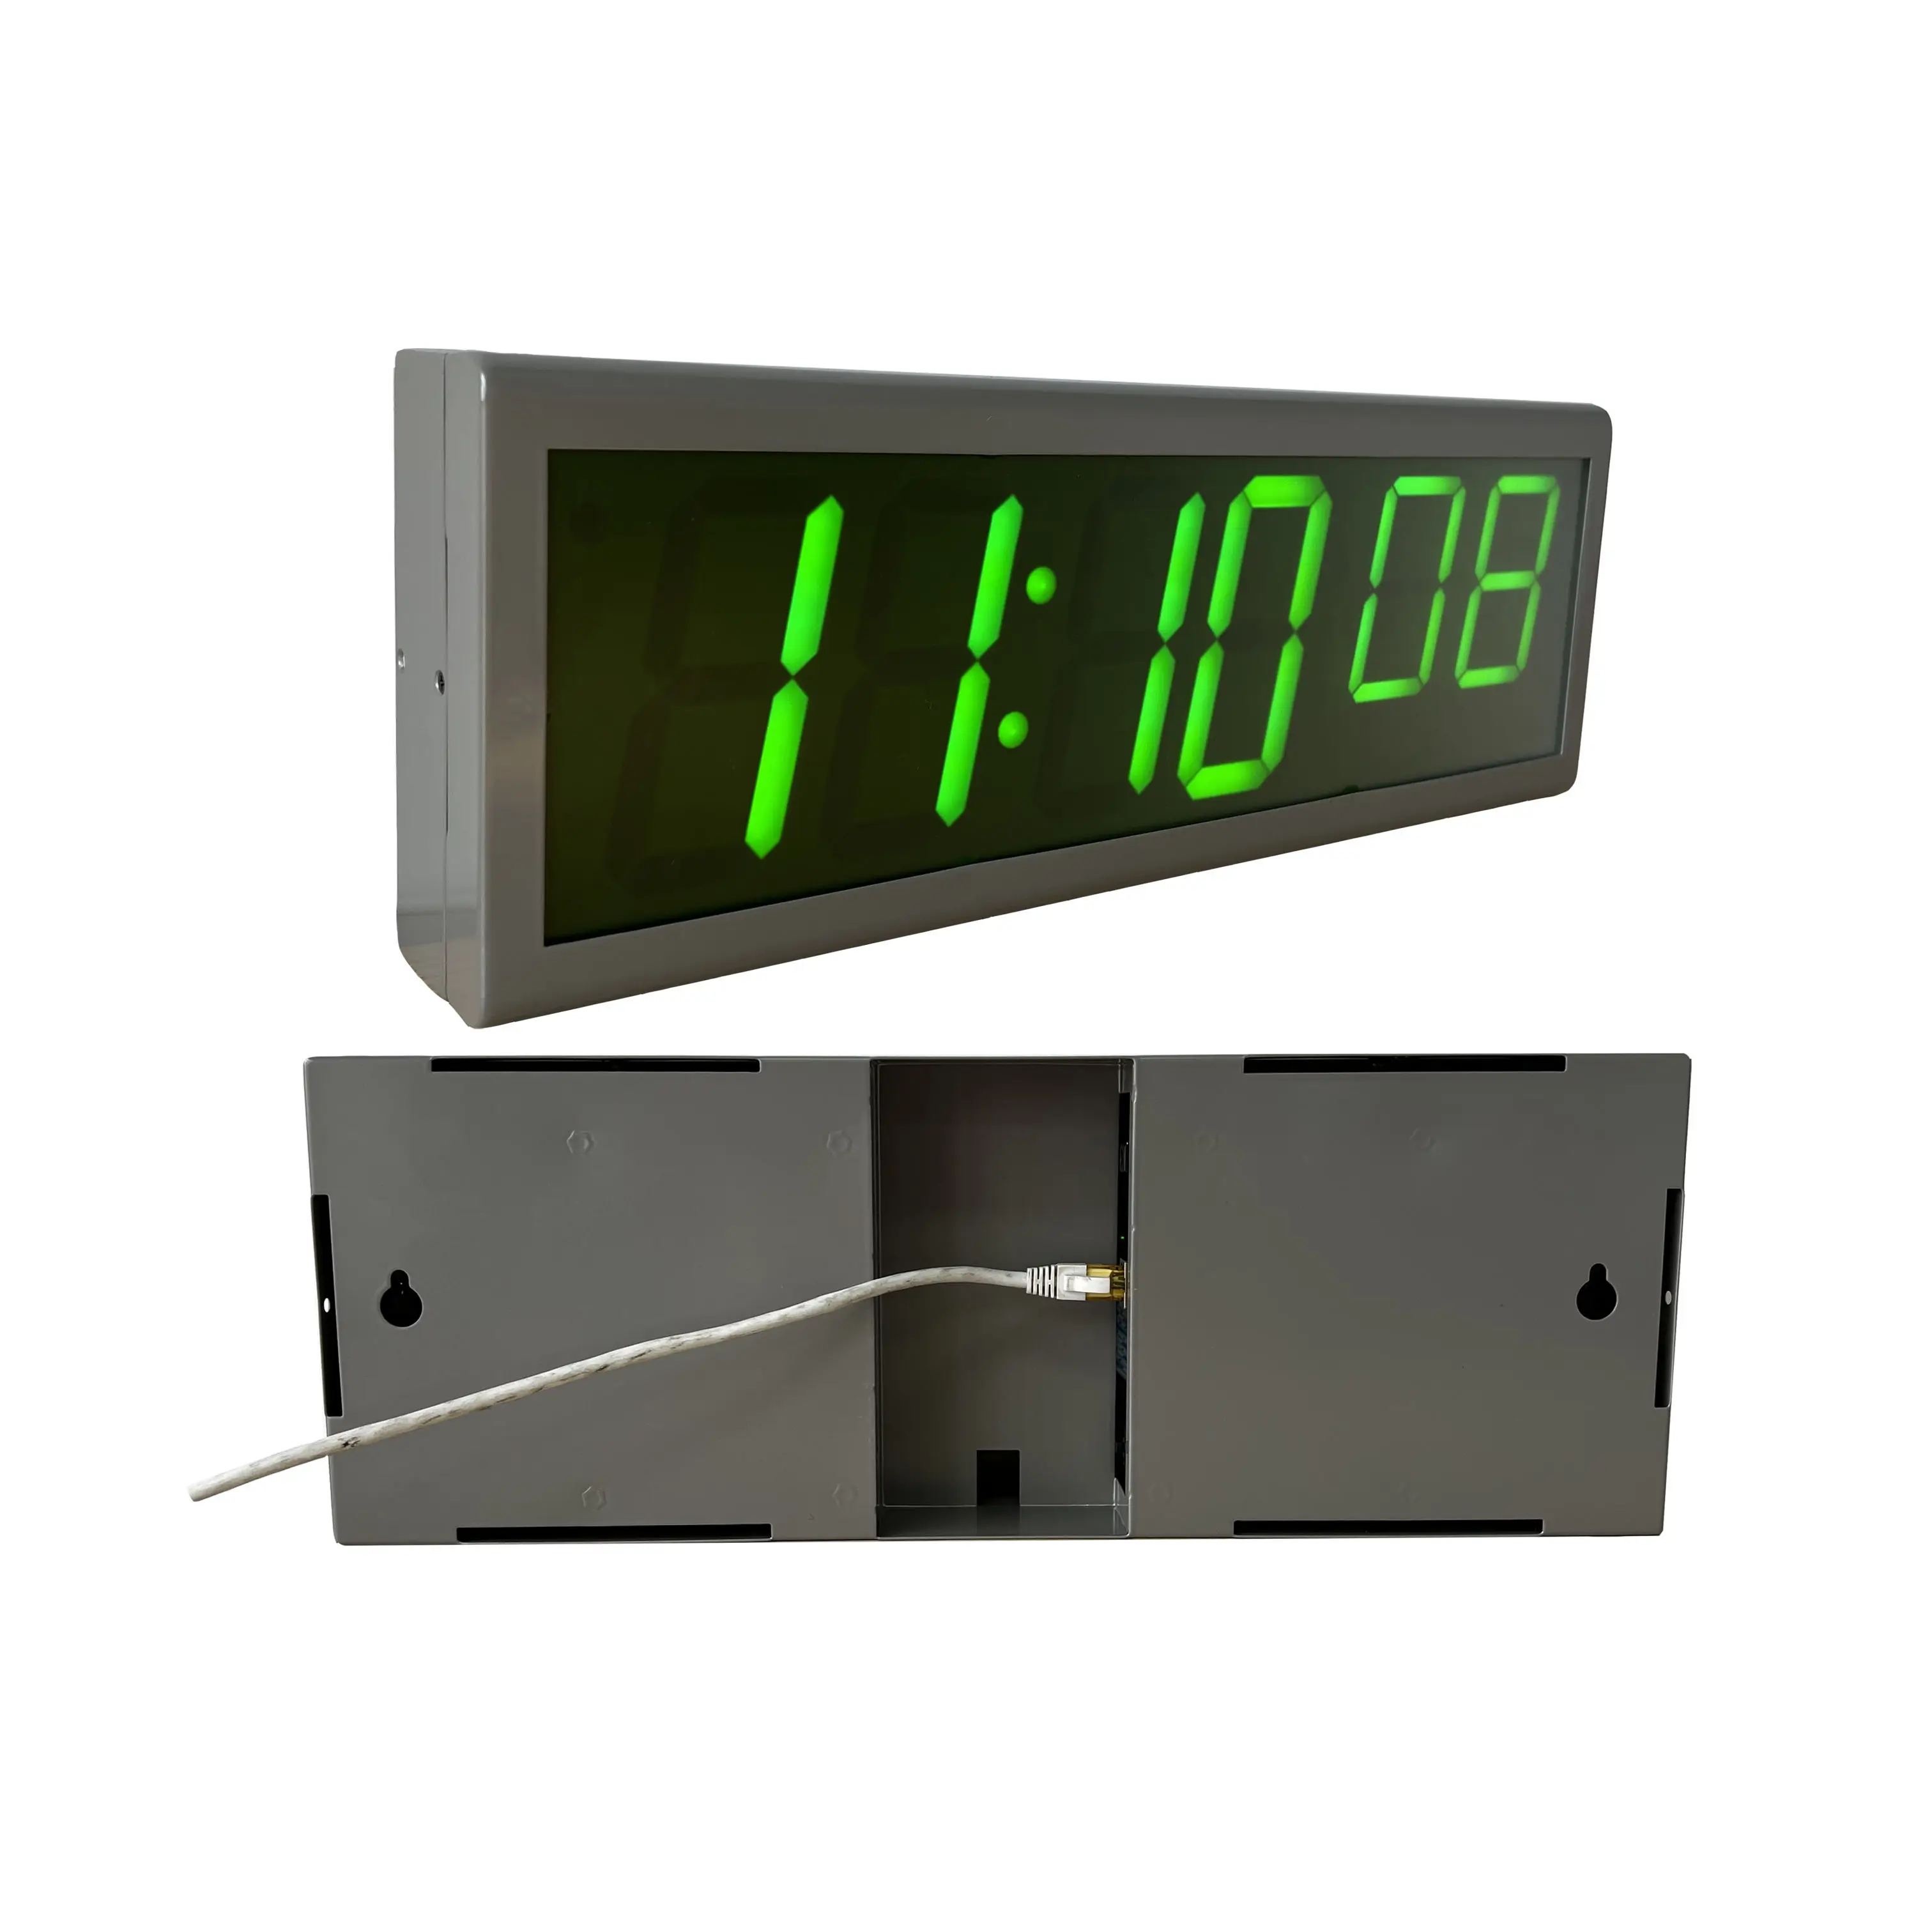 HH:MM:ss Digital NTP PoE Clock, Network Synchronized, Greed LEDs